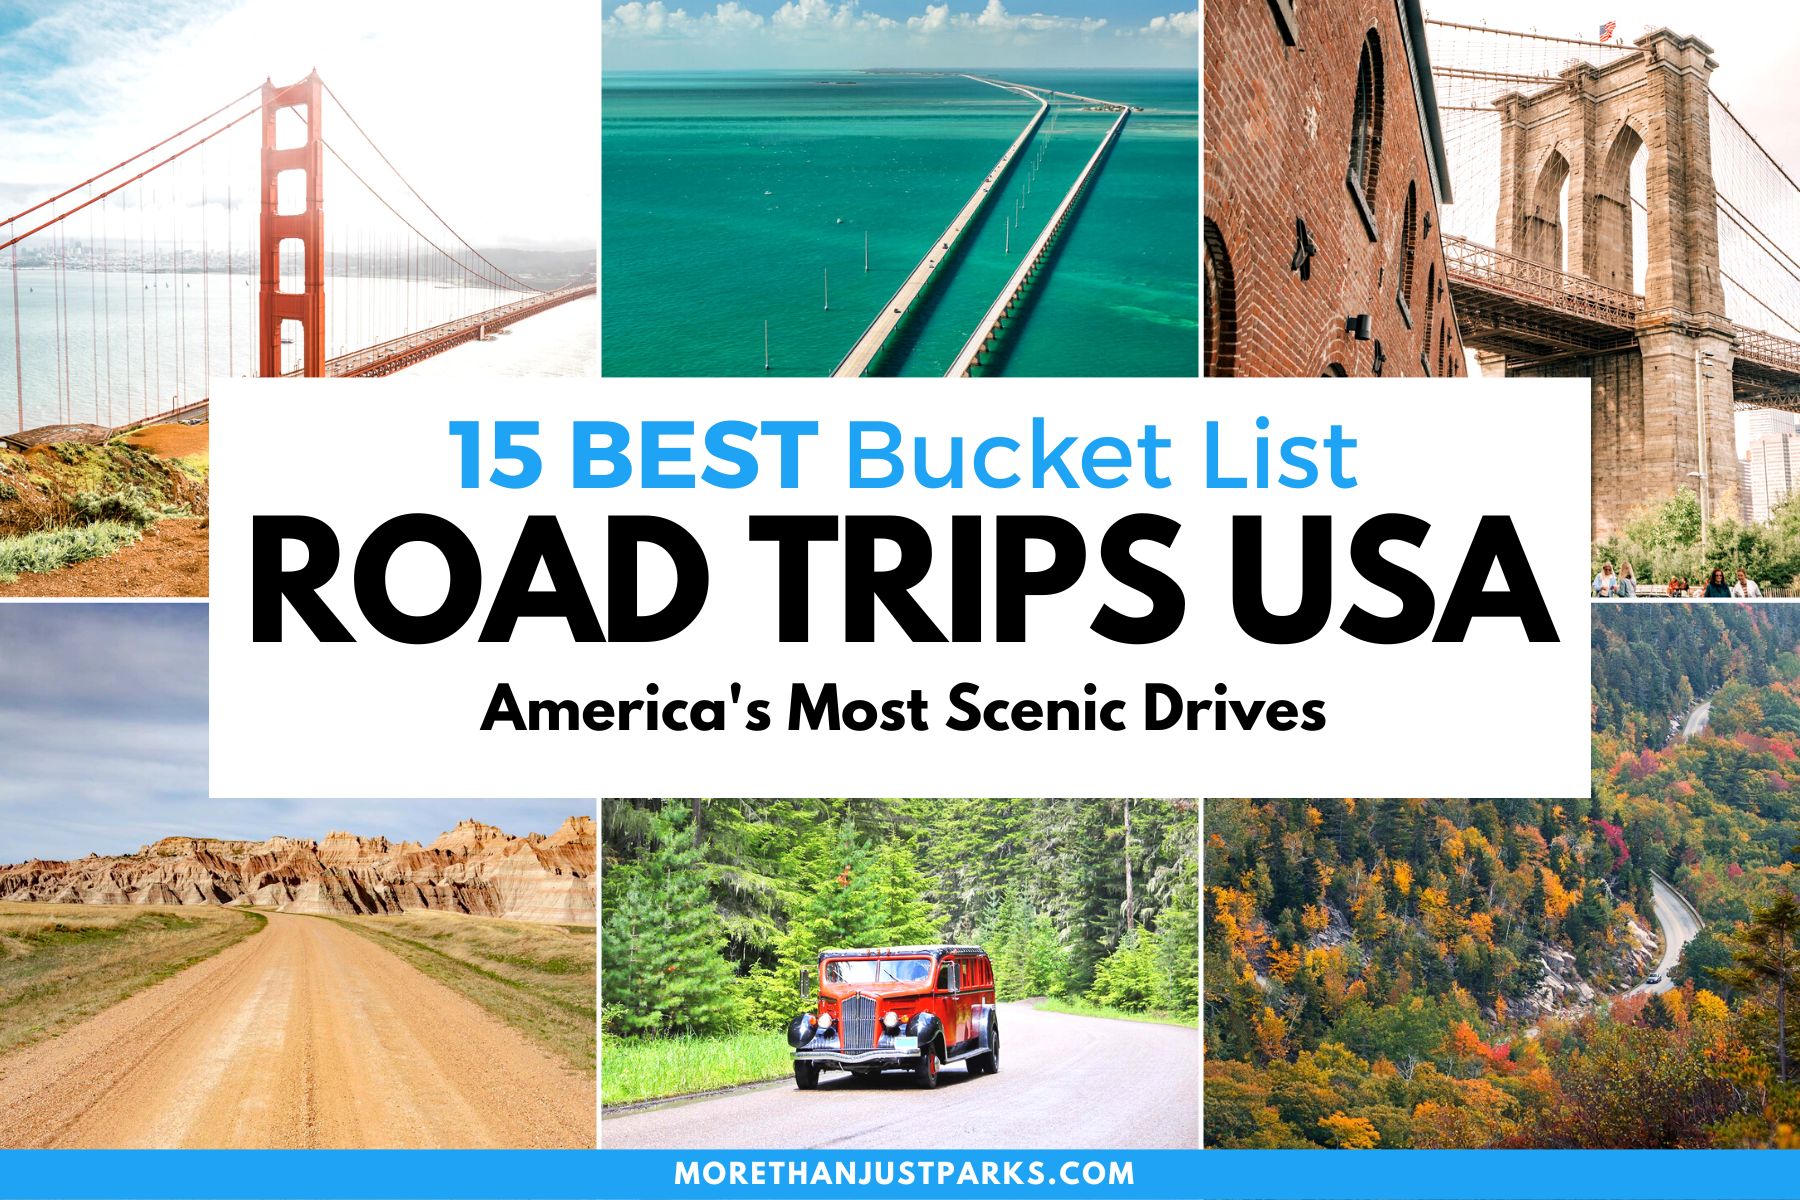 25 essential drives for a U.S. road trip